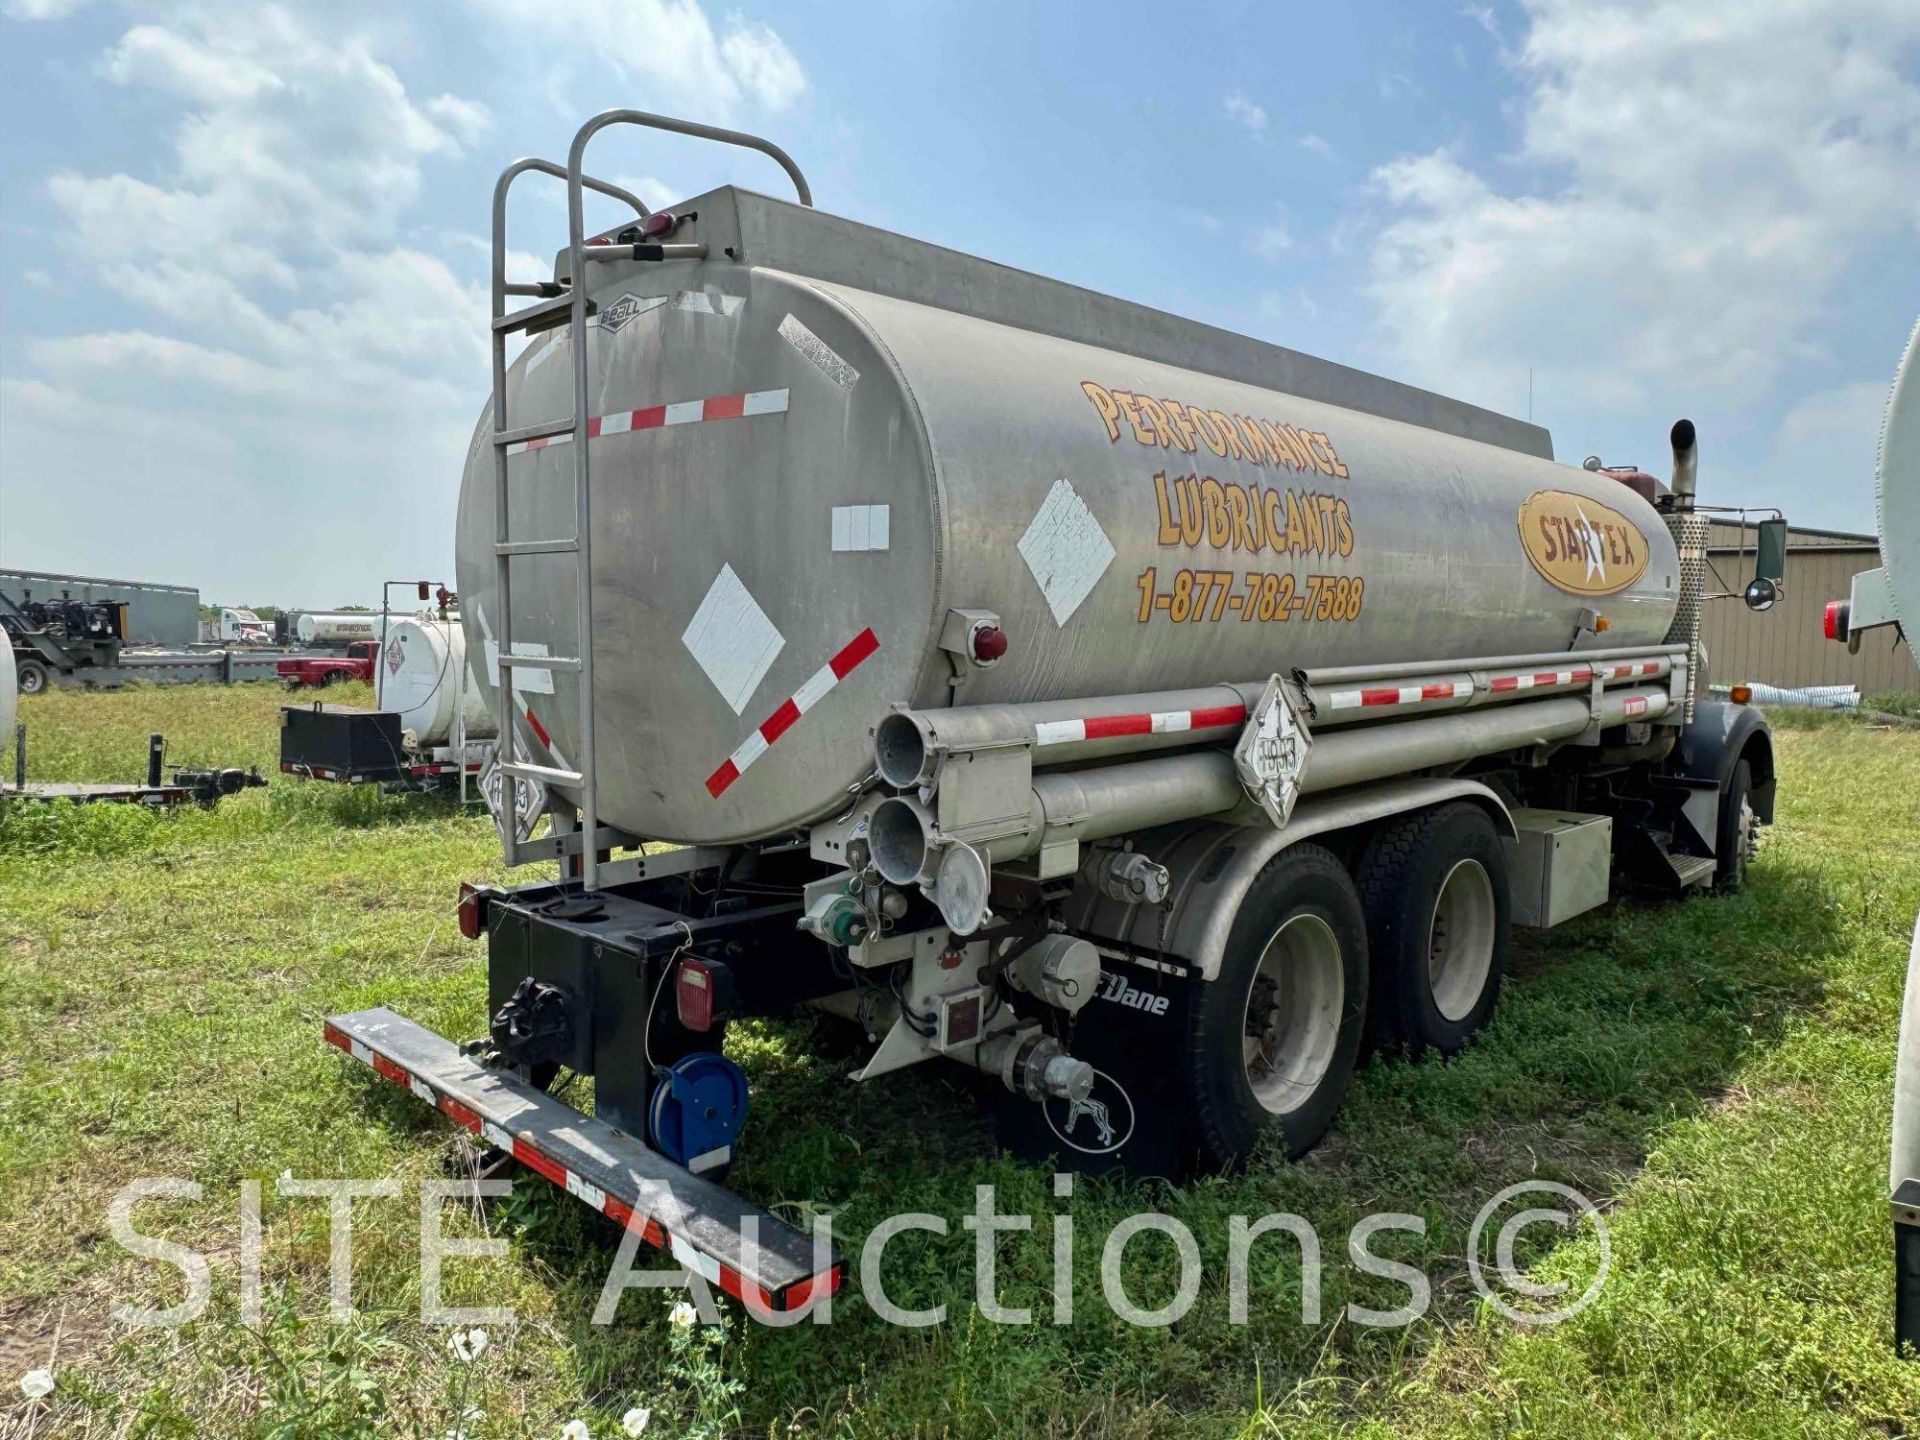 1998 Kenworth T800 T/A Fuel Truck - Image 4 of 40